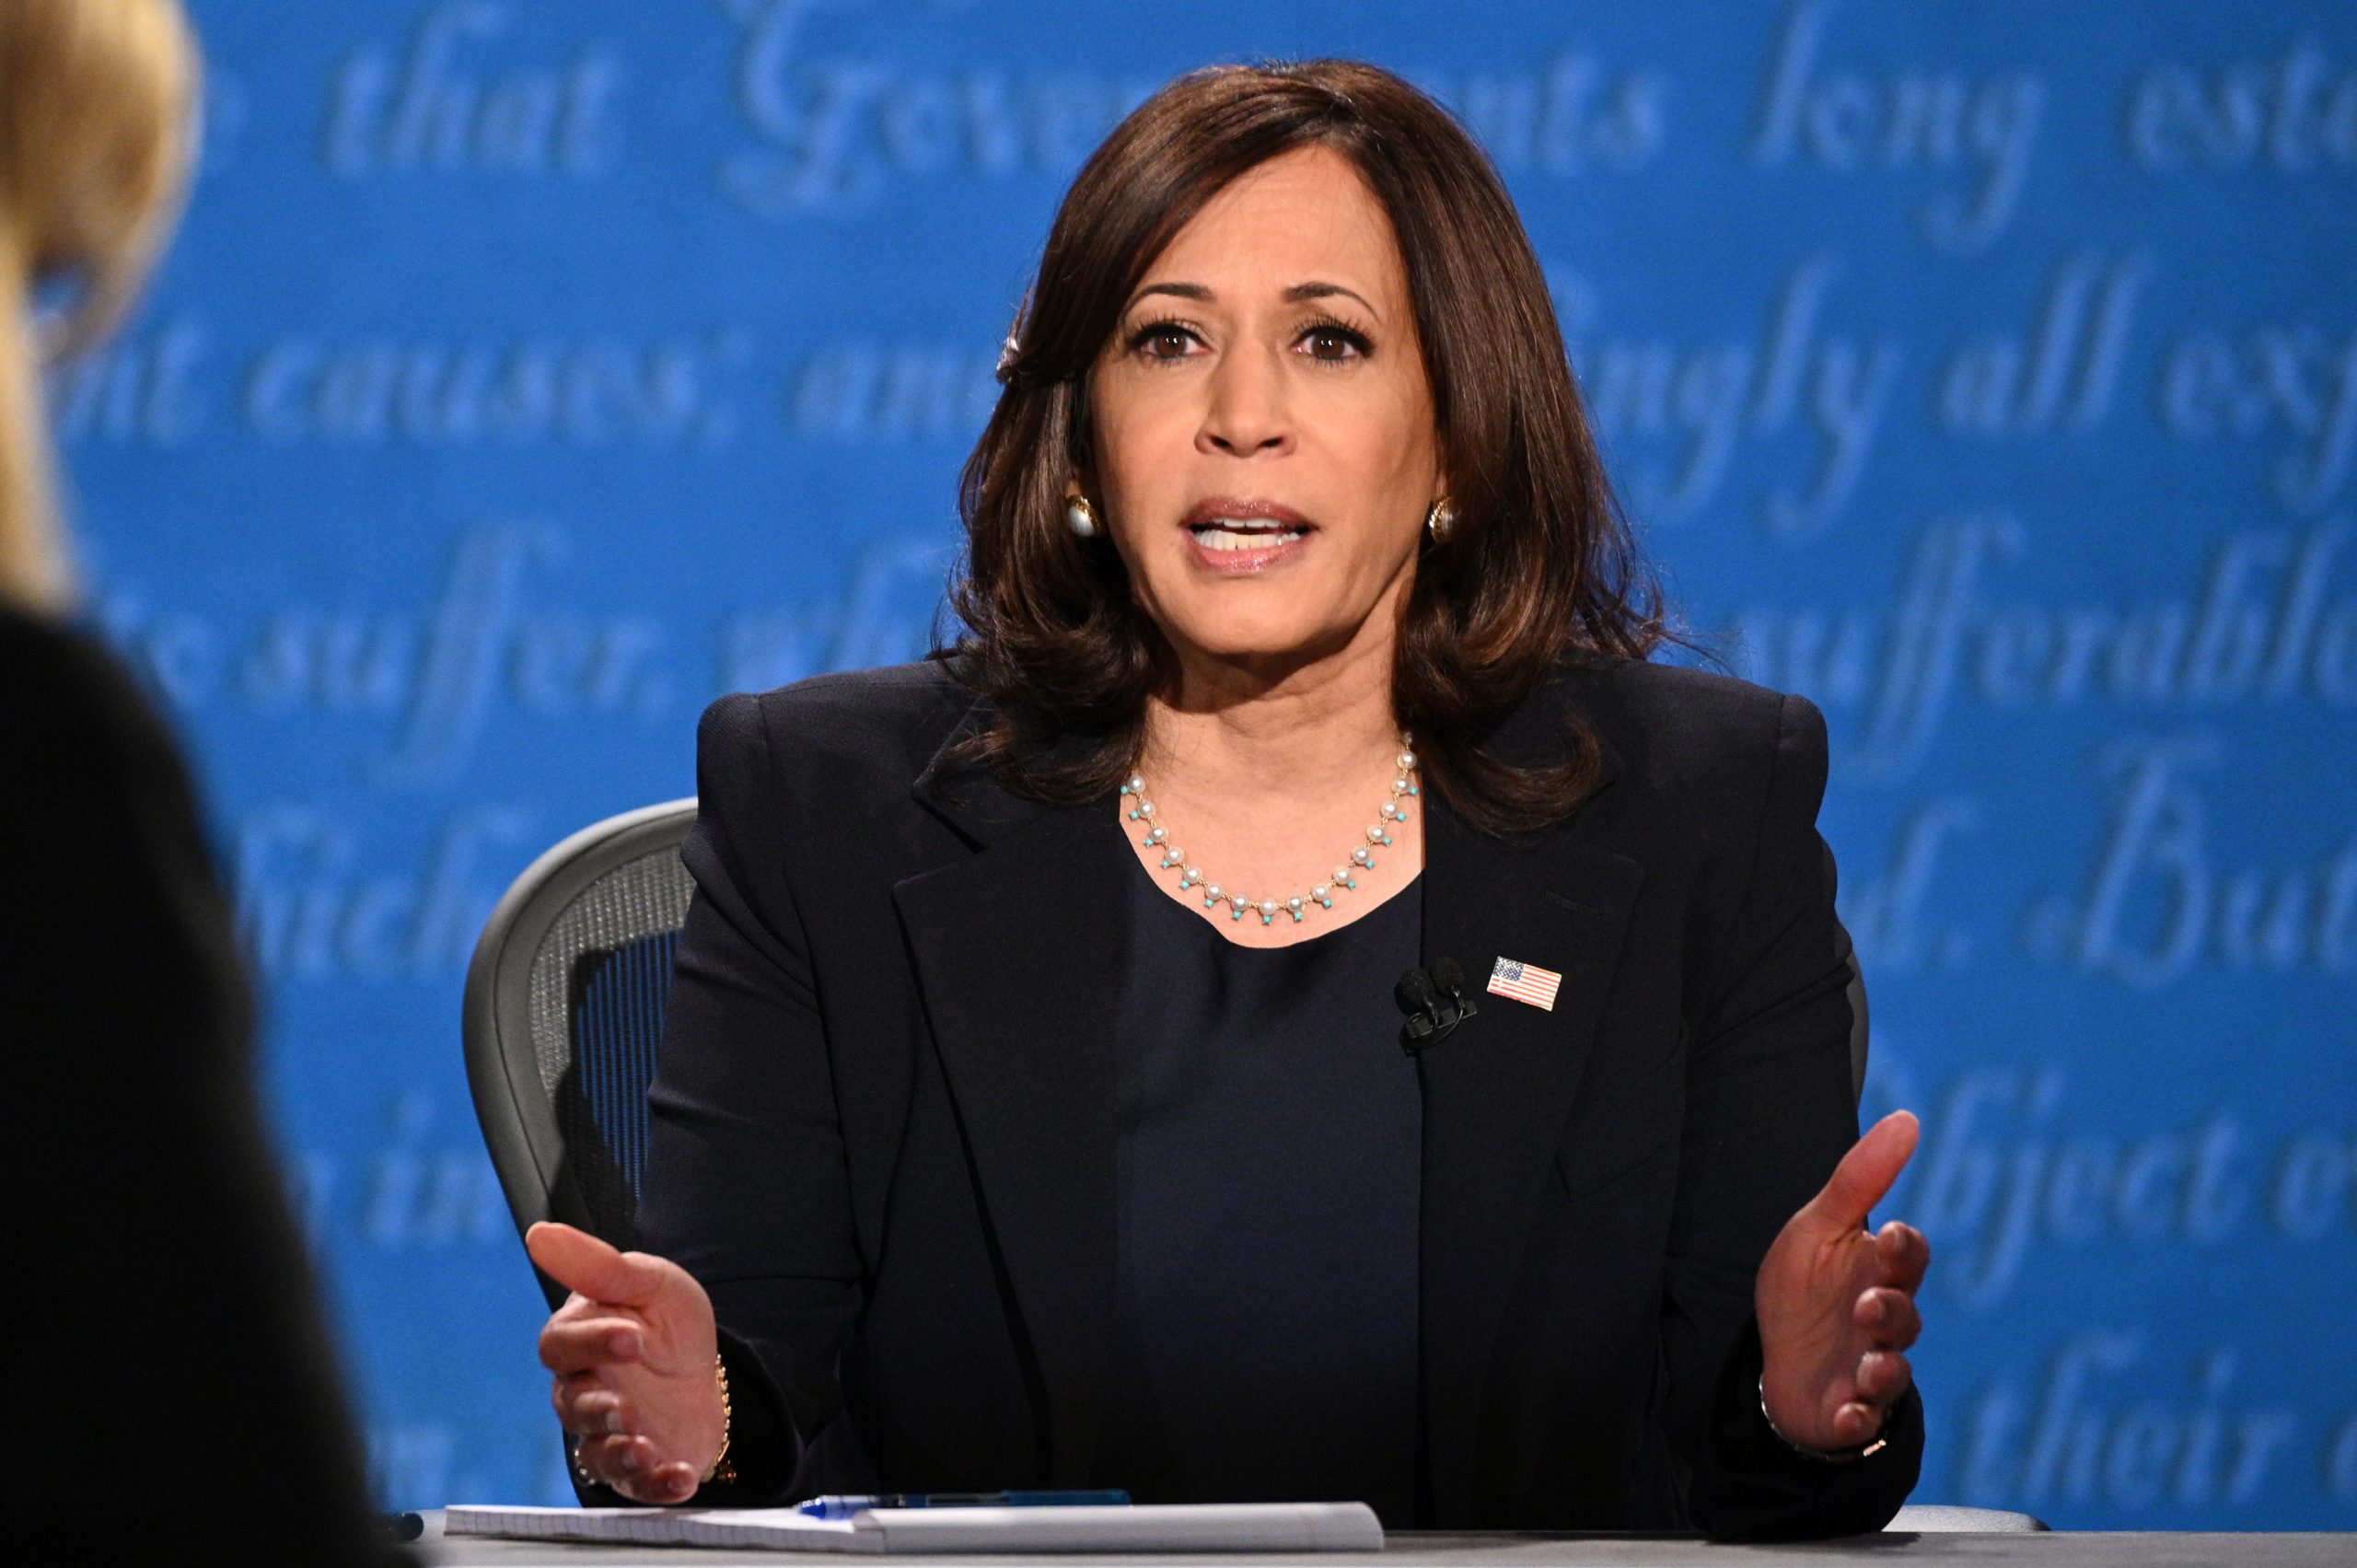 Who does the President of the US owe money to? Kamala Harris wants to know